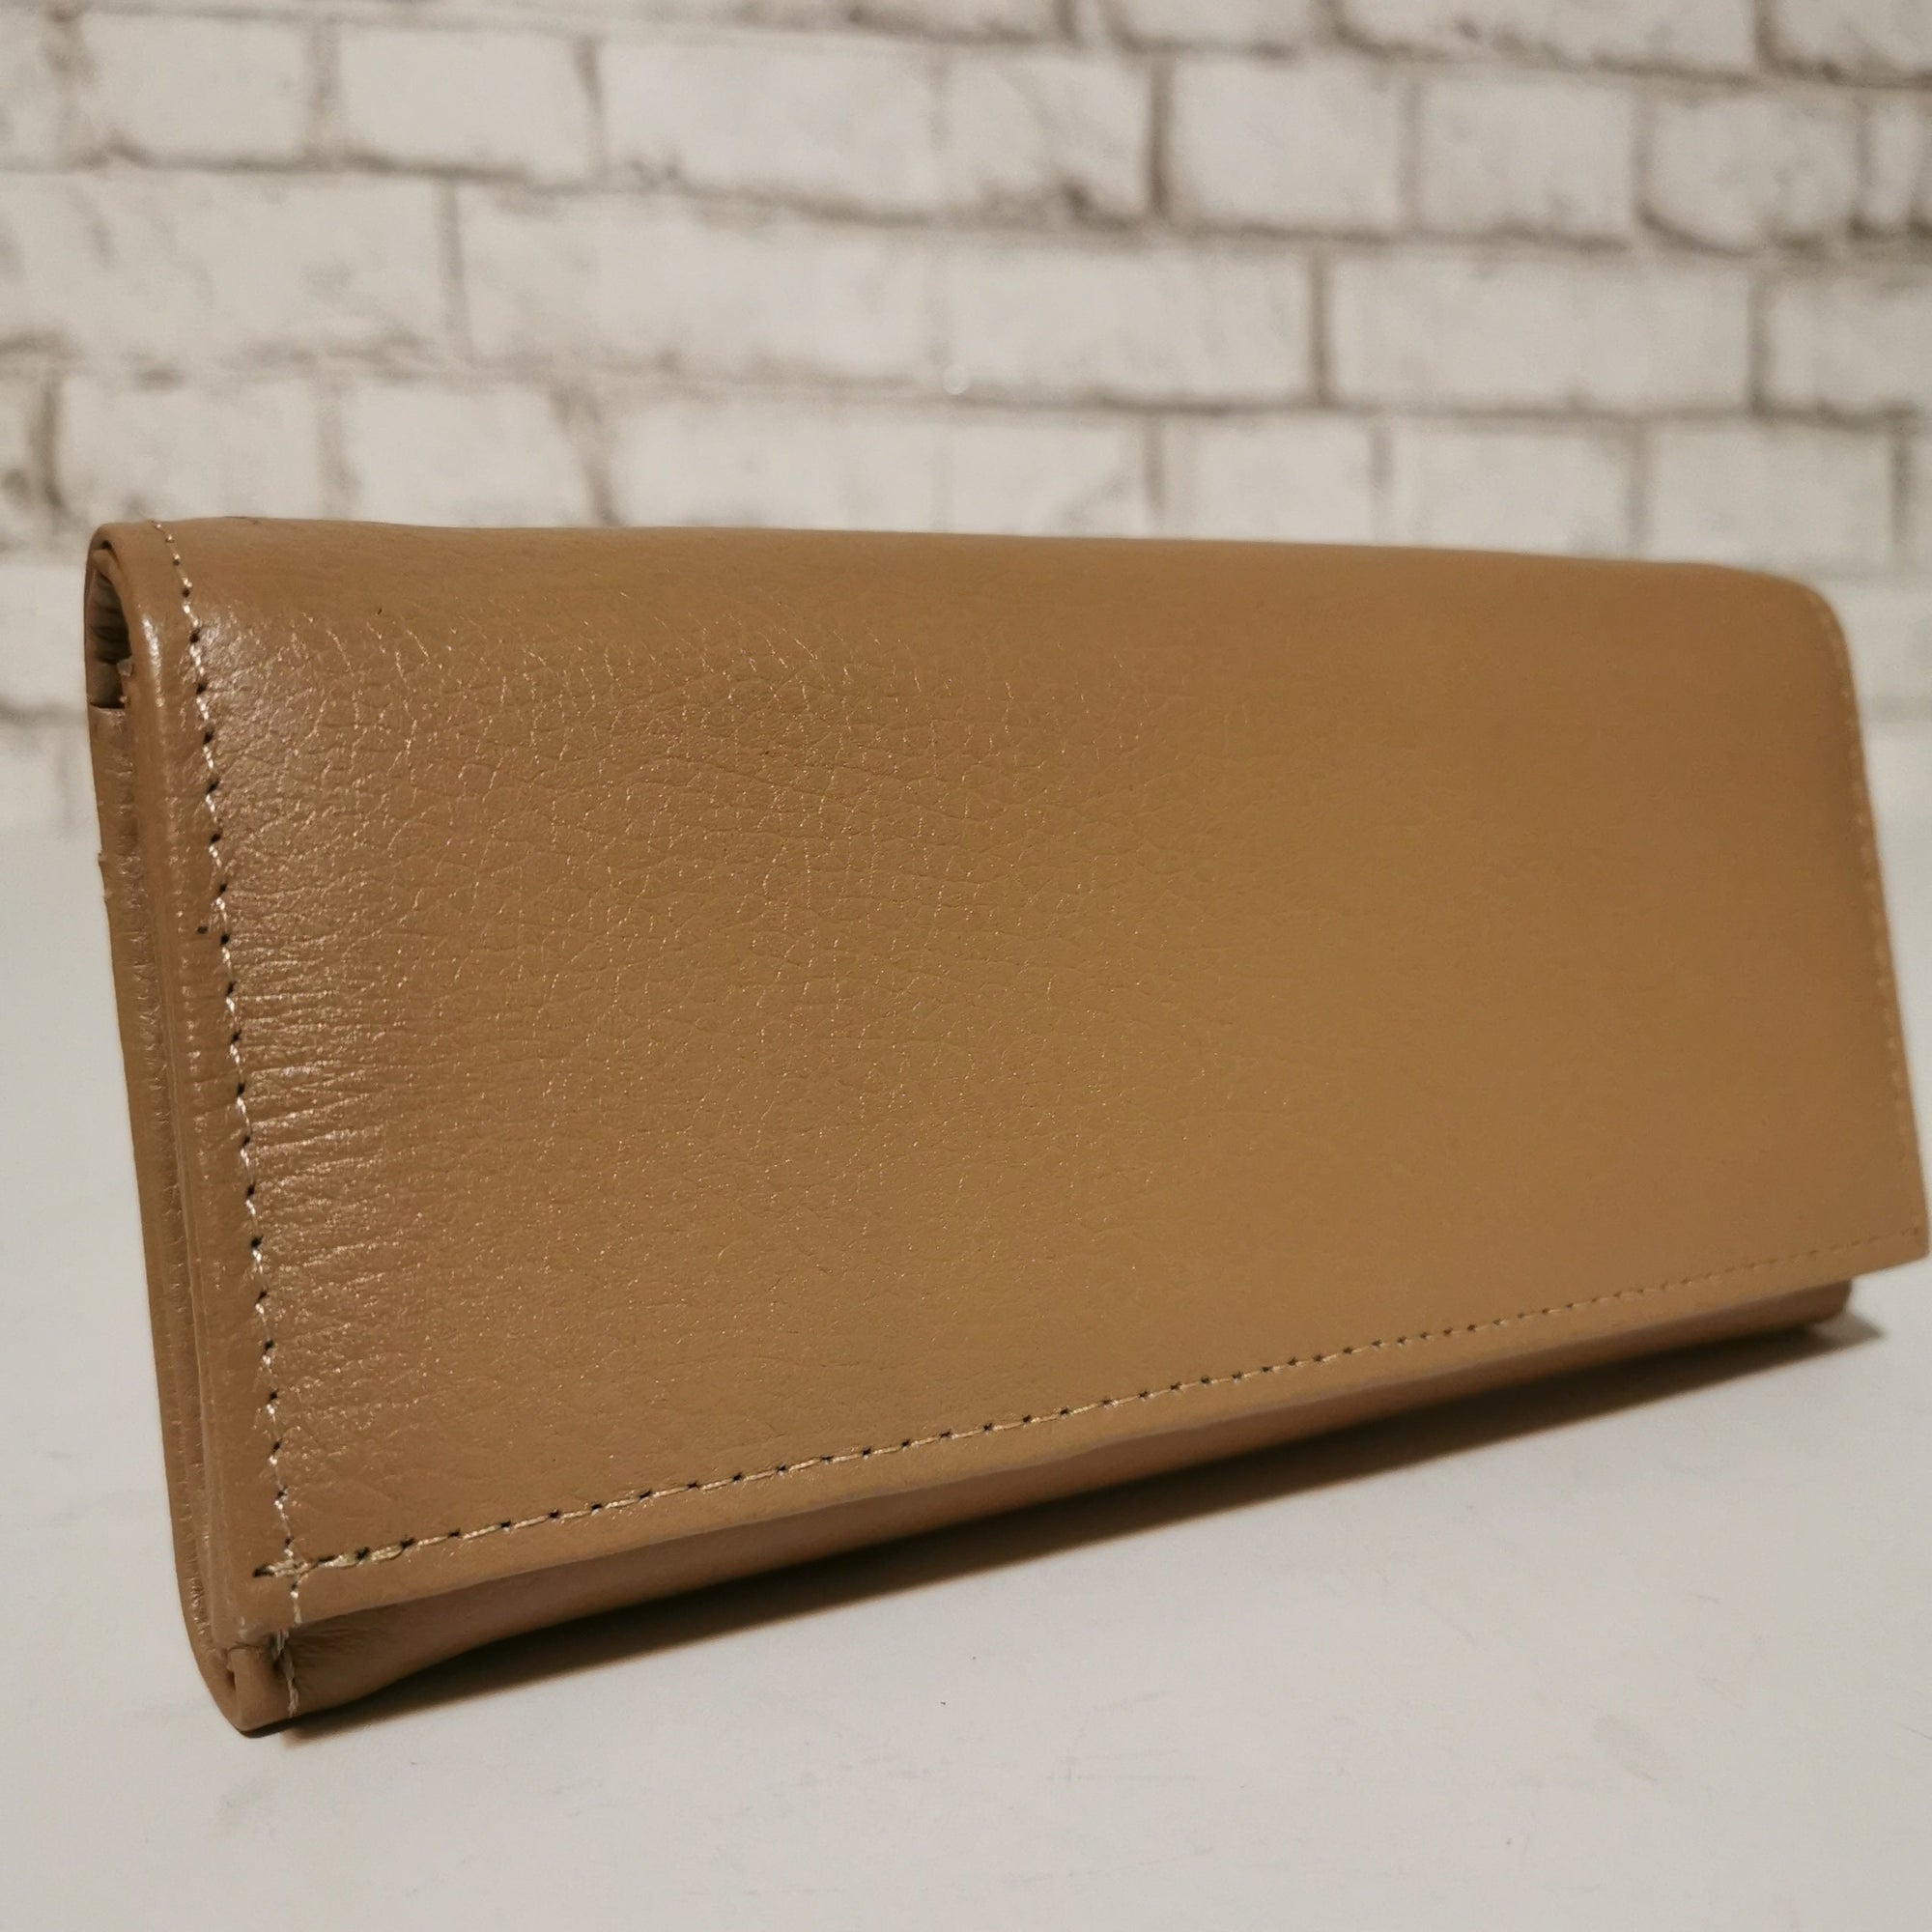 Large leather wallet for women for cards